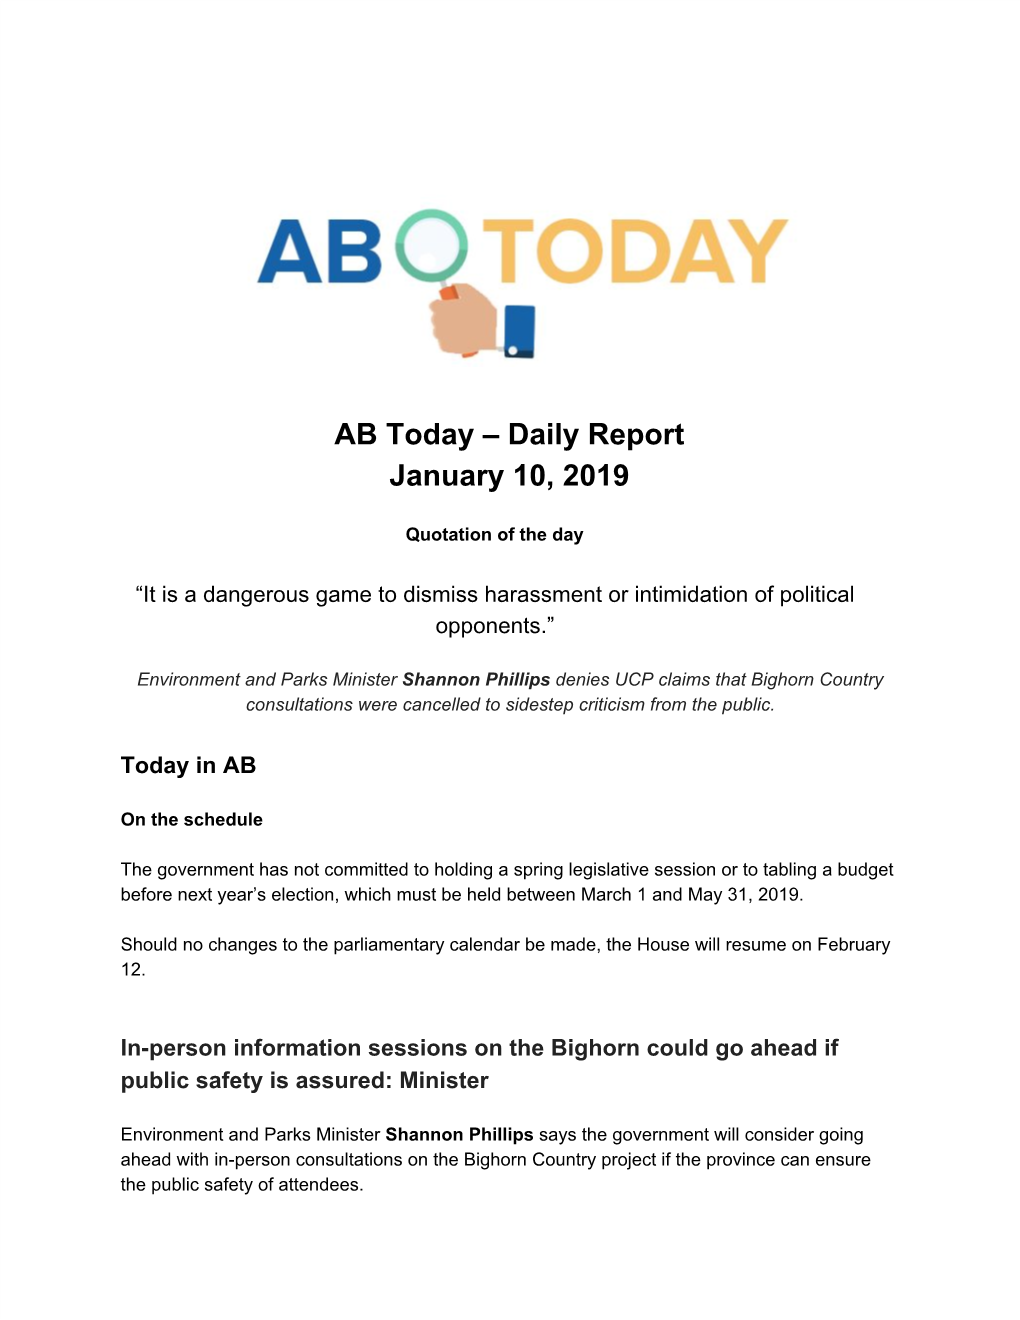 AB Today – Daily Report January 10, 2019